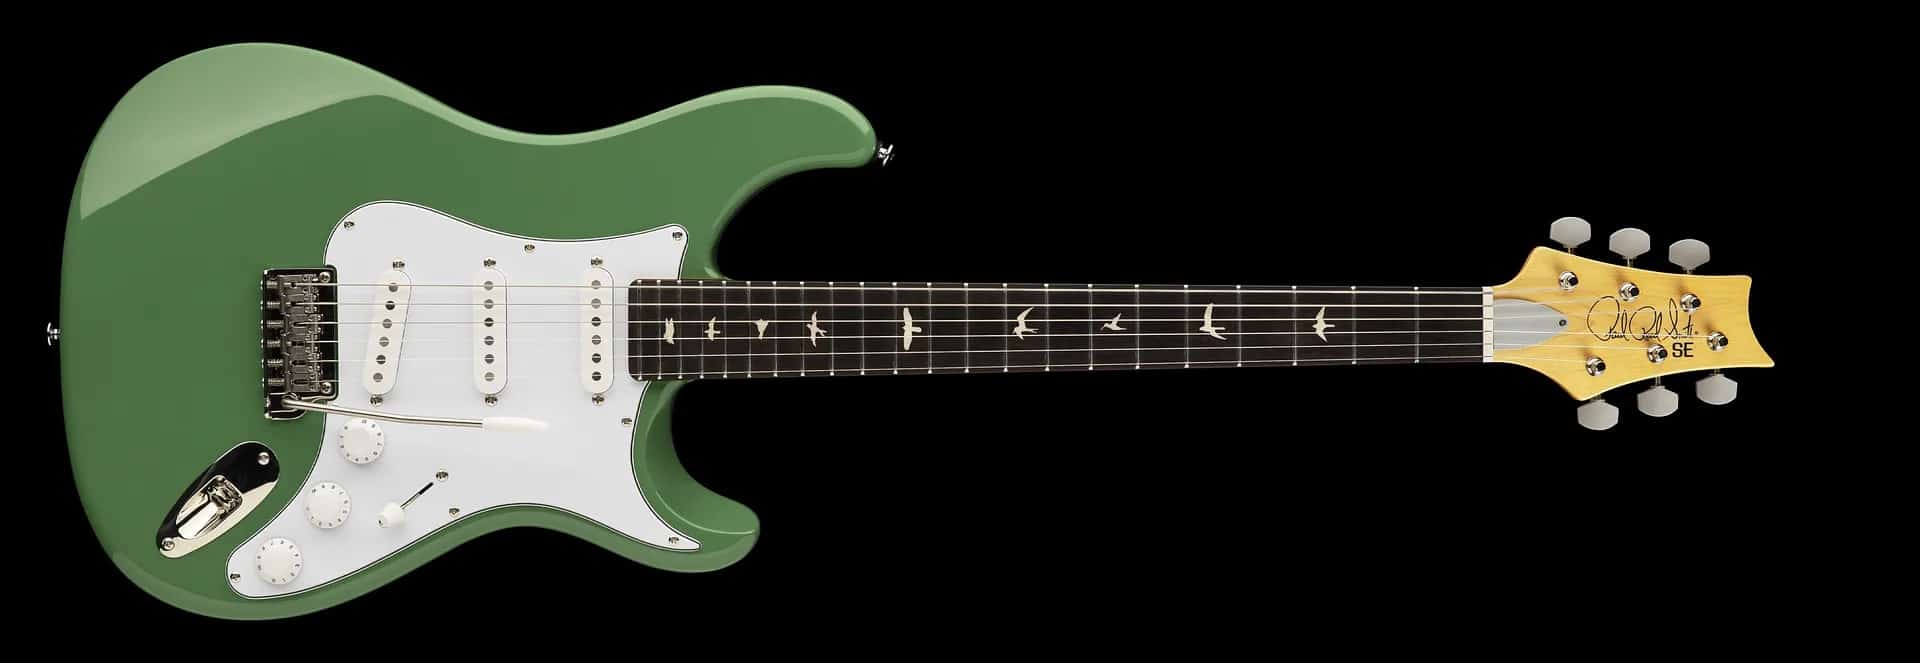 PRS launches maple fretboard Silver Sky SE models and new finish options